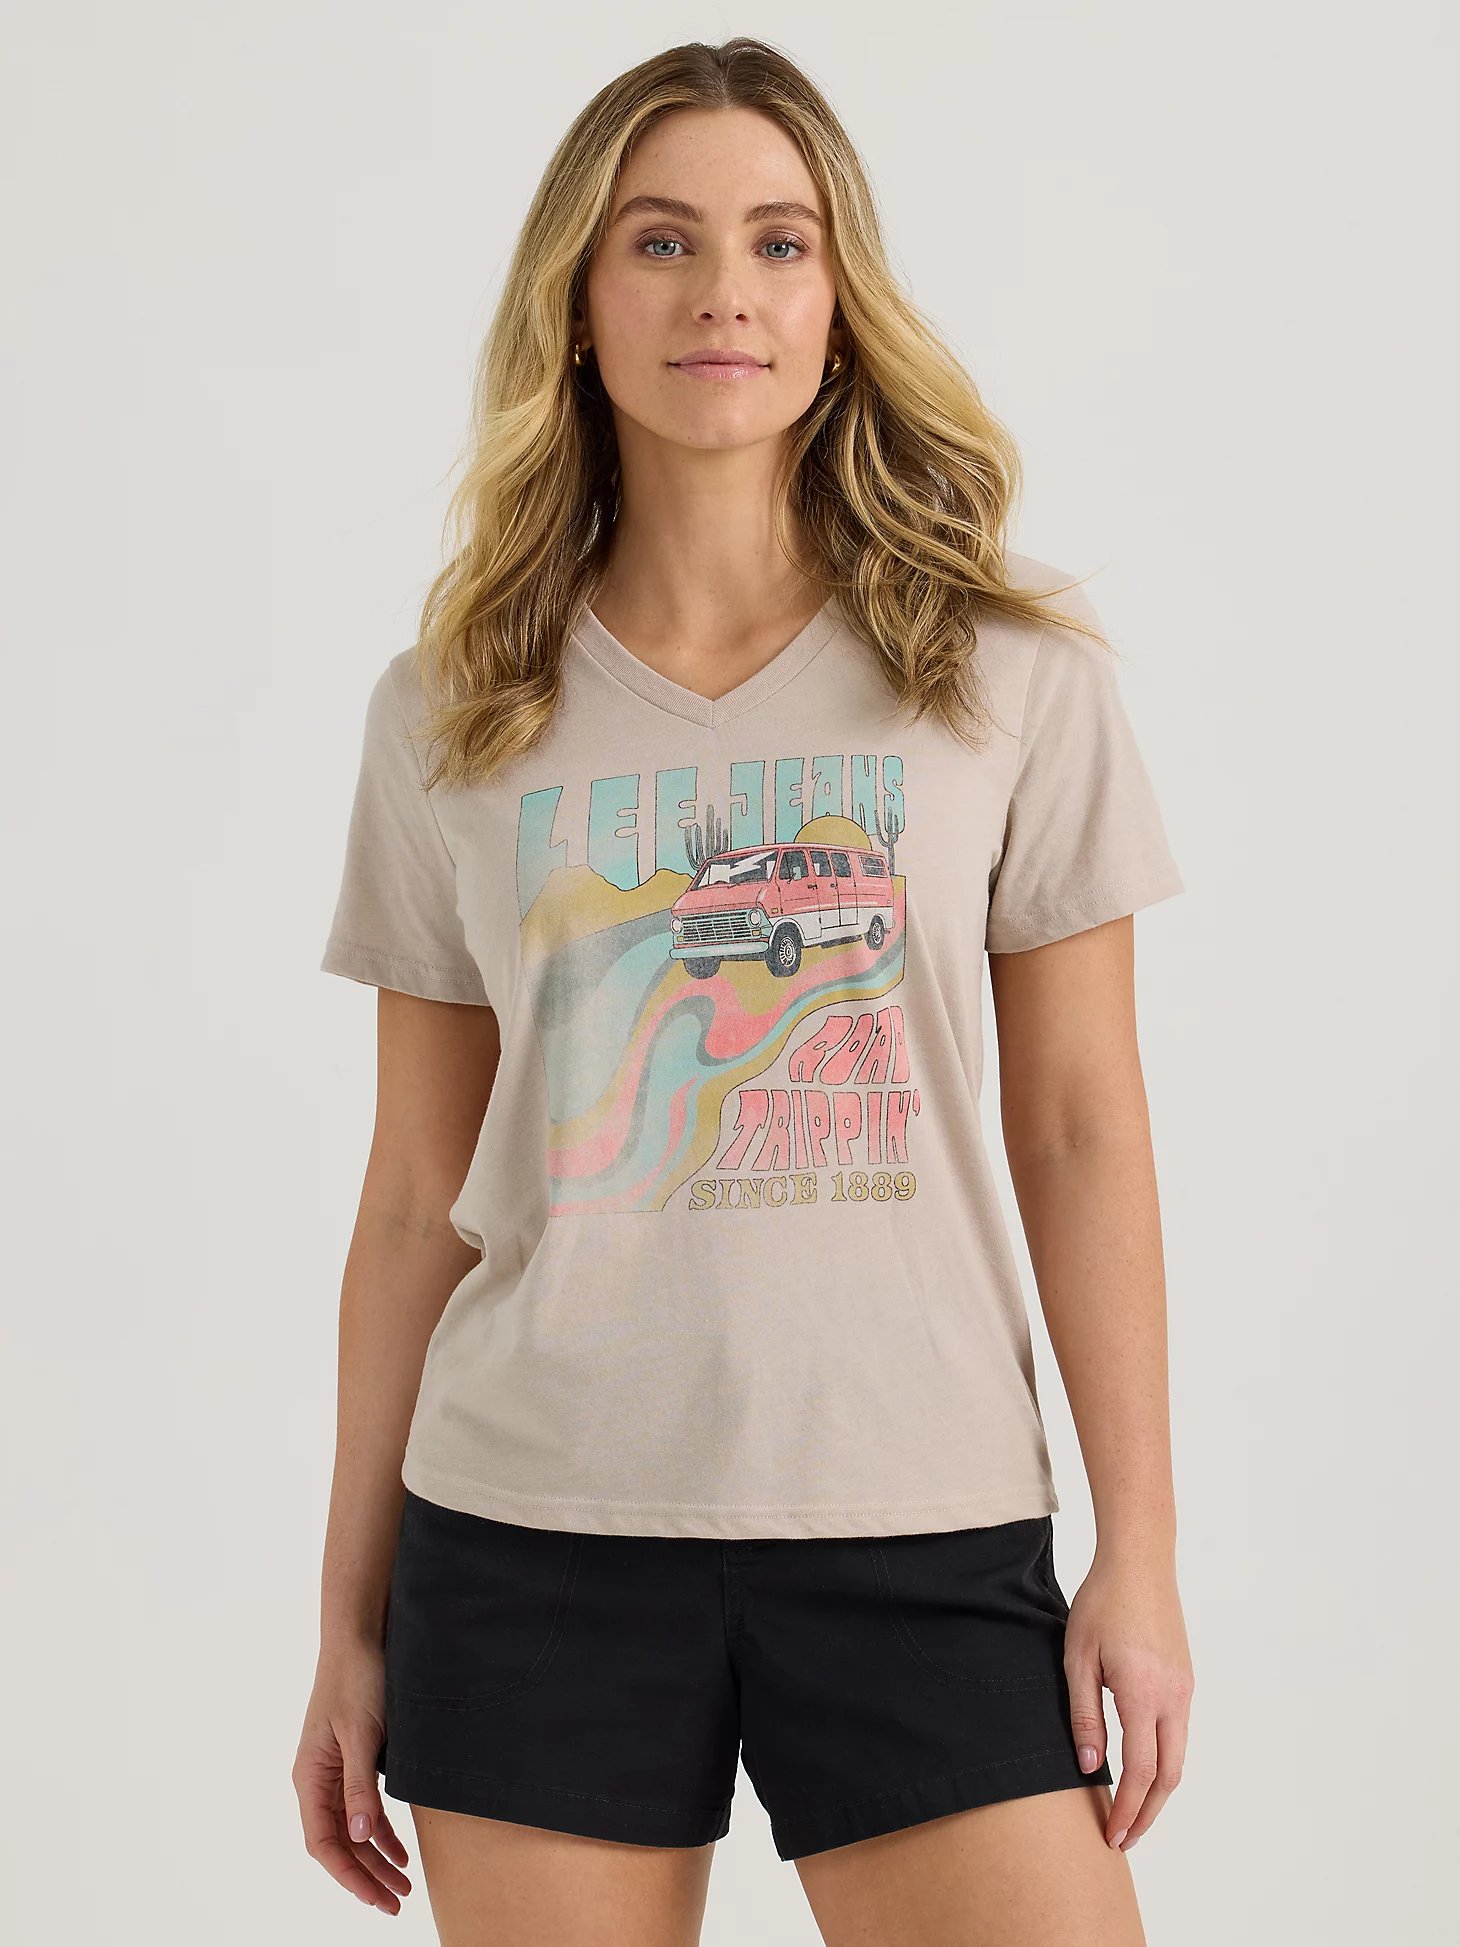 WOMEN'S ROAD TRIPPIN' V-NECK GRAPHIC TEE IN SILVER LINING